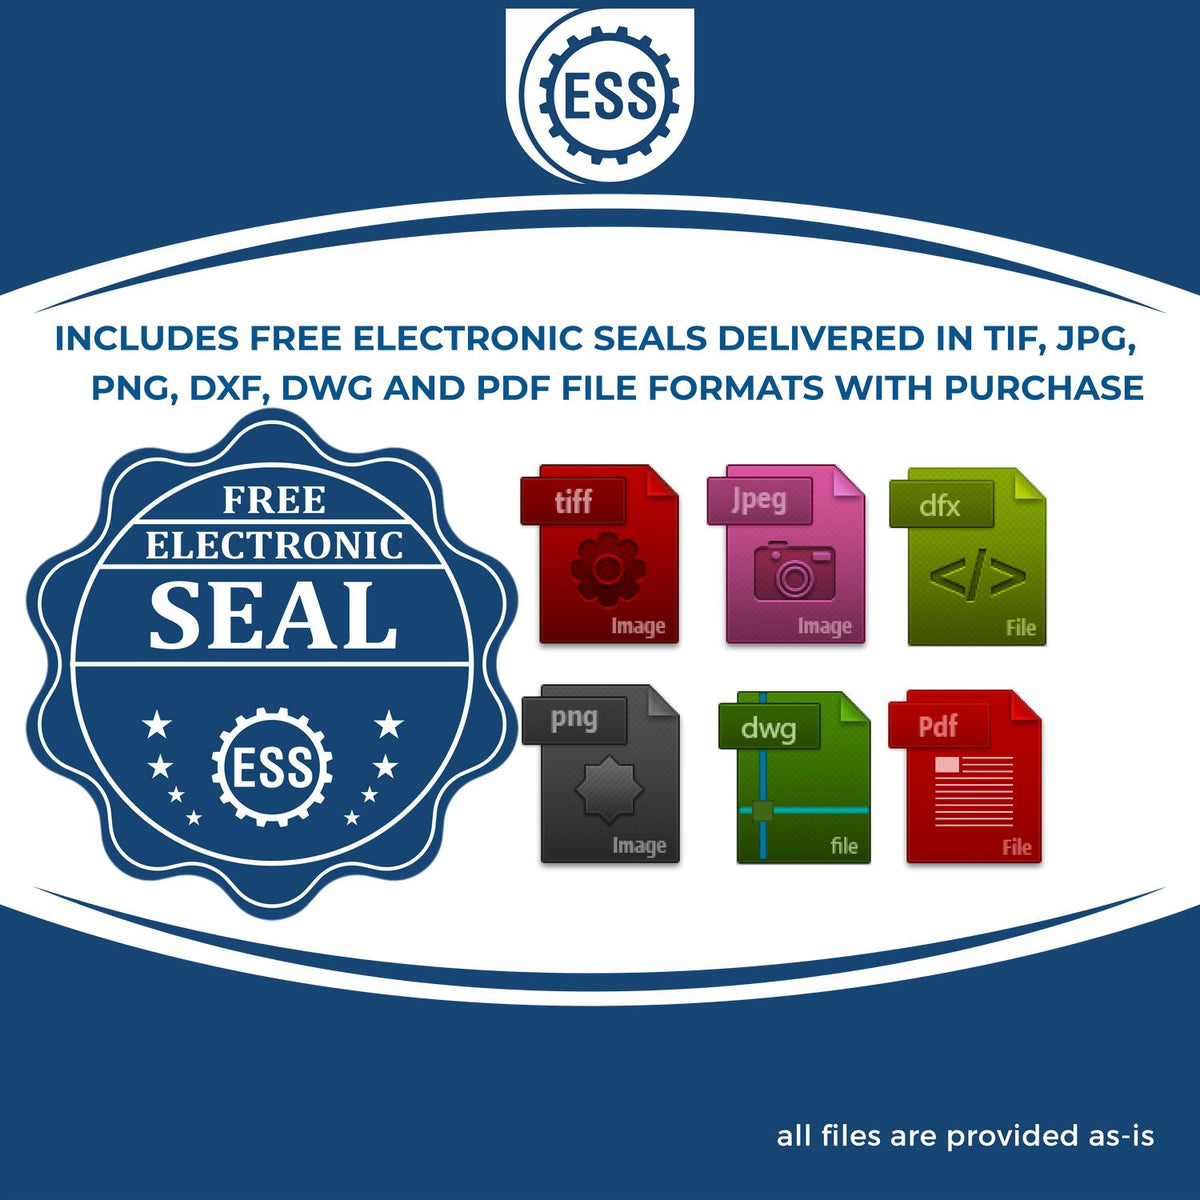 An infographic for the free electronic seal for the Wooden Handle South Dakota Rectangular Notary Public Stamp illustrating the different file type icons such as DXF, DWG, TIF, JPG and PNG.